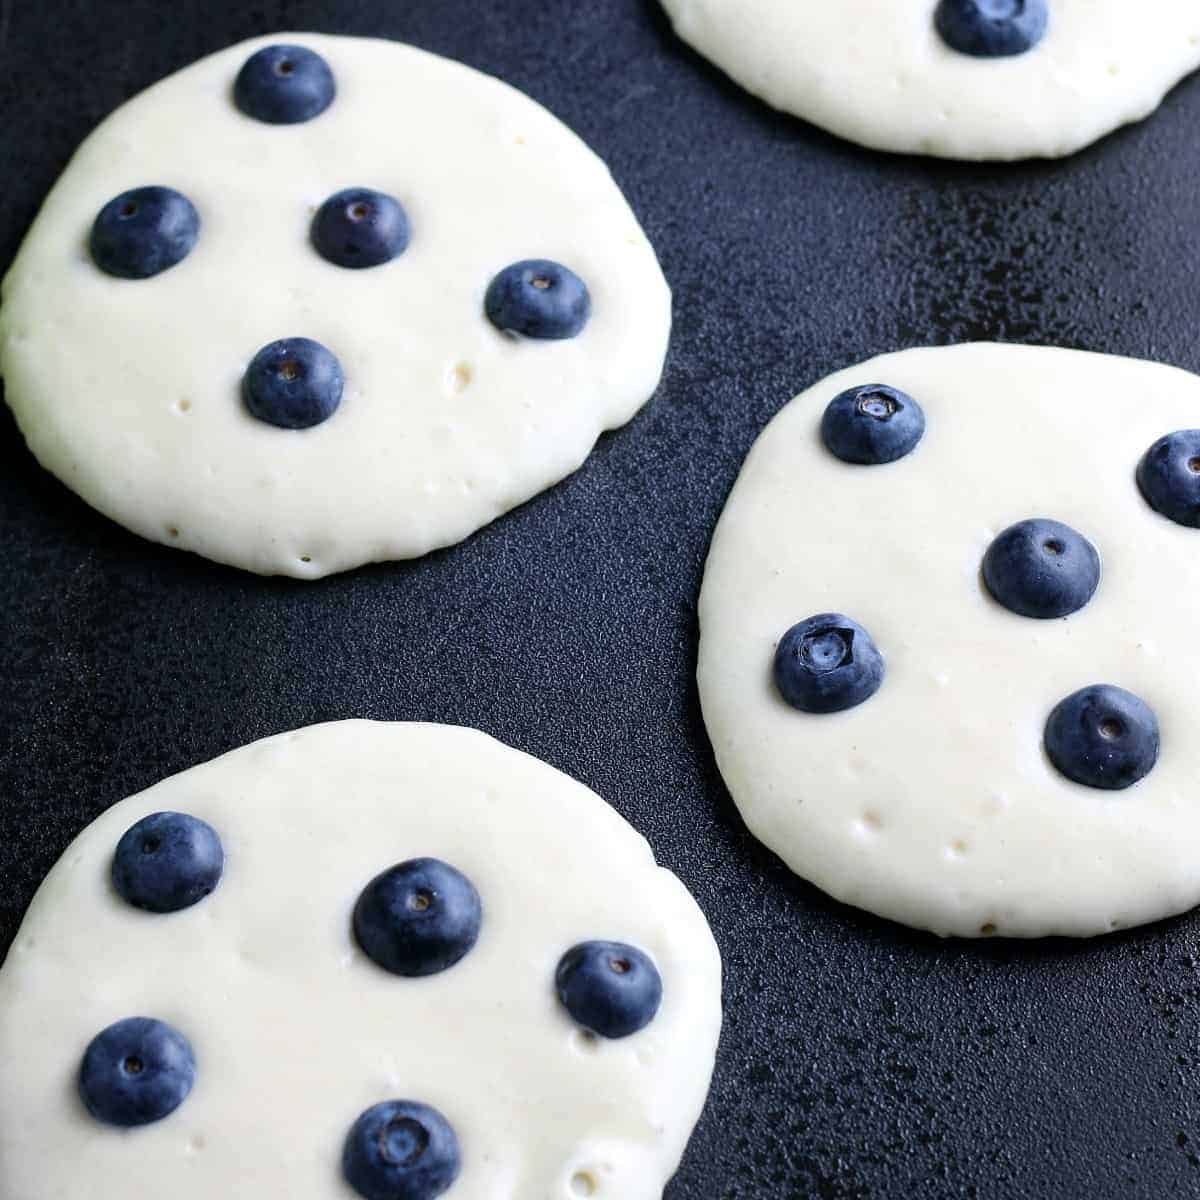 Showing the pancakes fresh on the griddle with the blueberries just added.